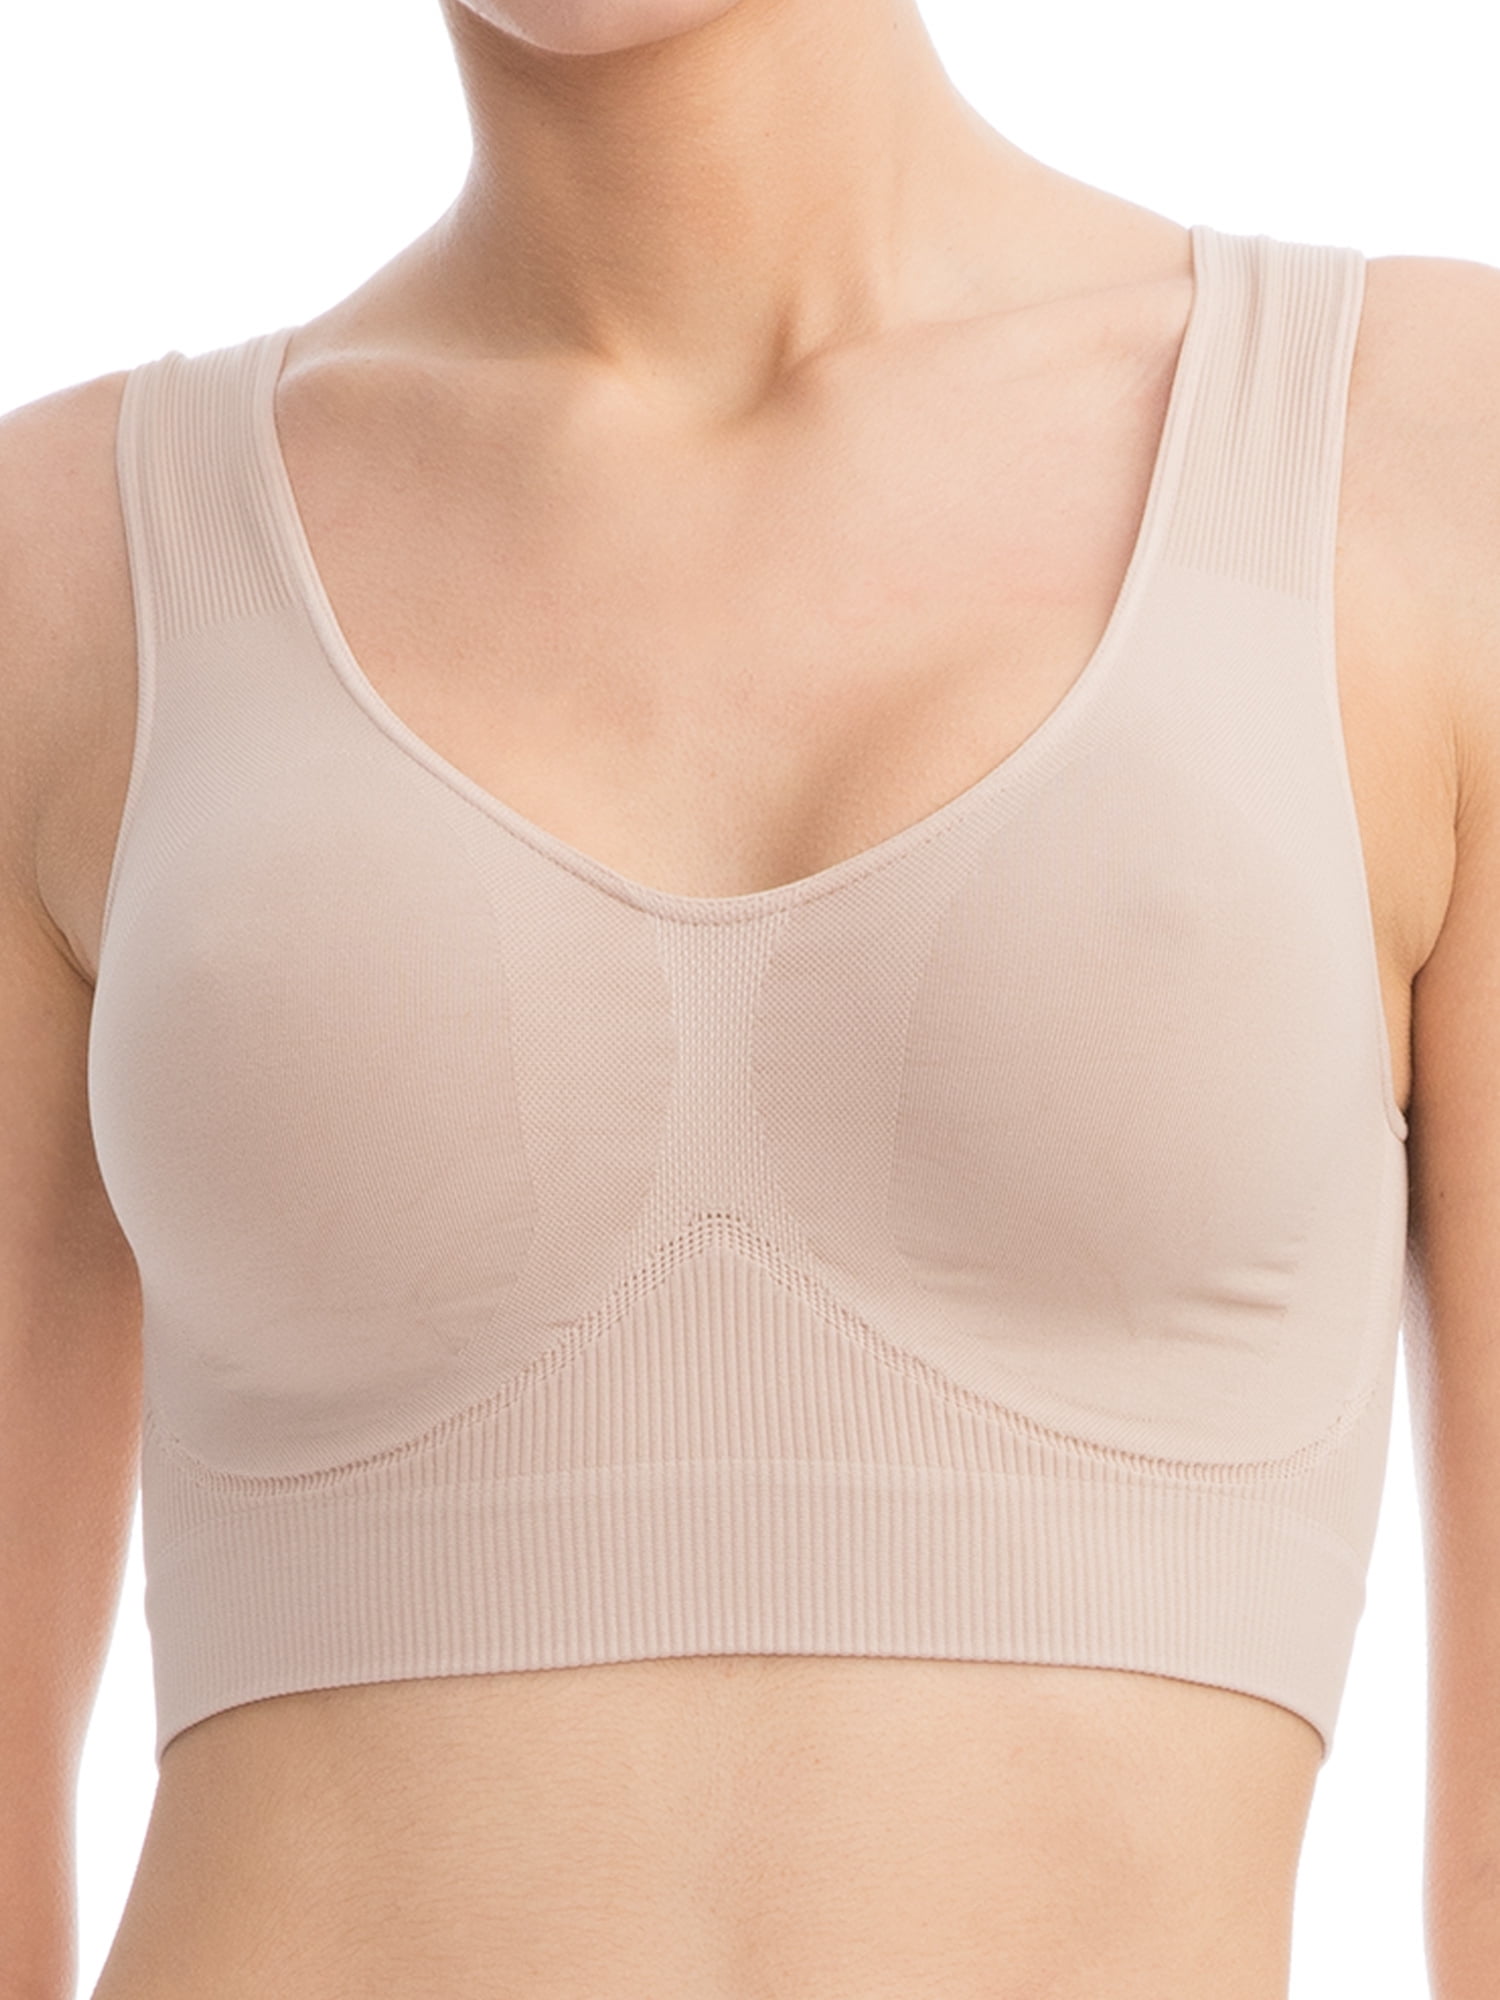 FarmaCell BodyShaper 618 (Nude, XL) Elastic push-up bra wide shoulder top  band with breast support effect, 100% Made in Italy 